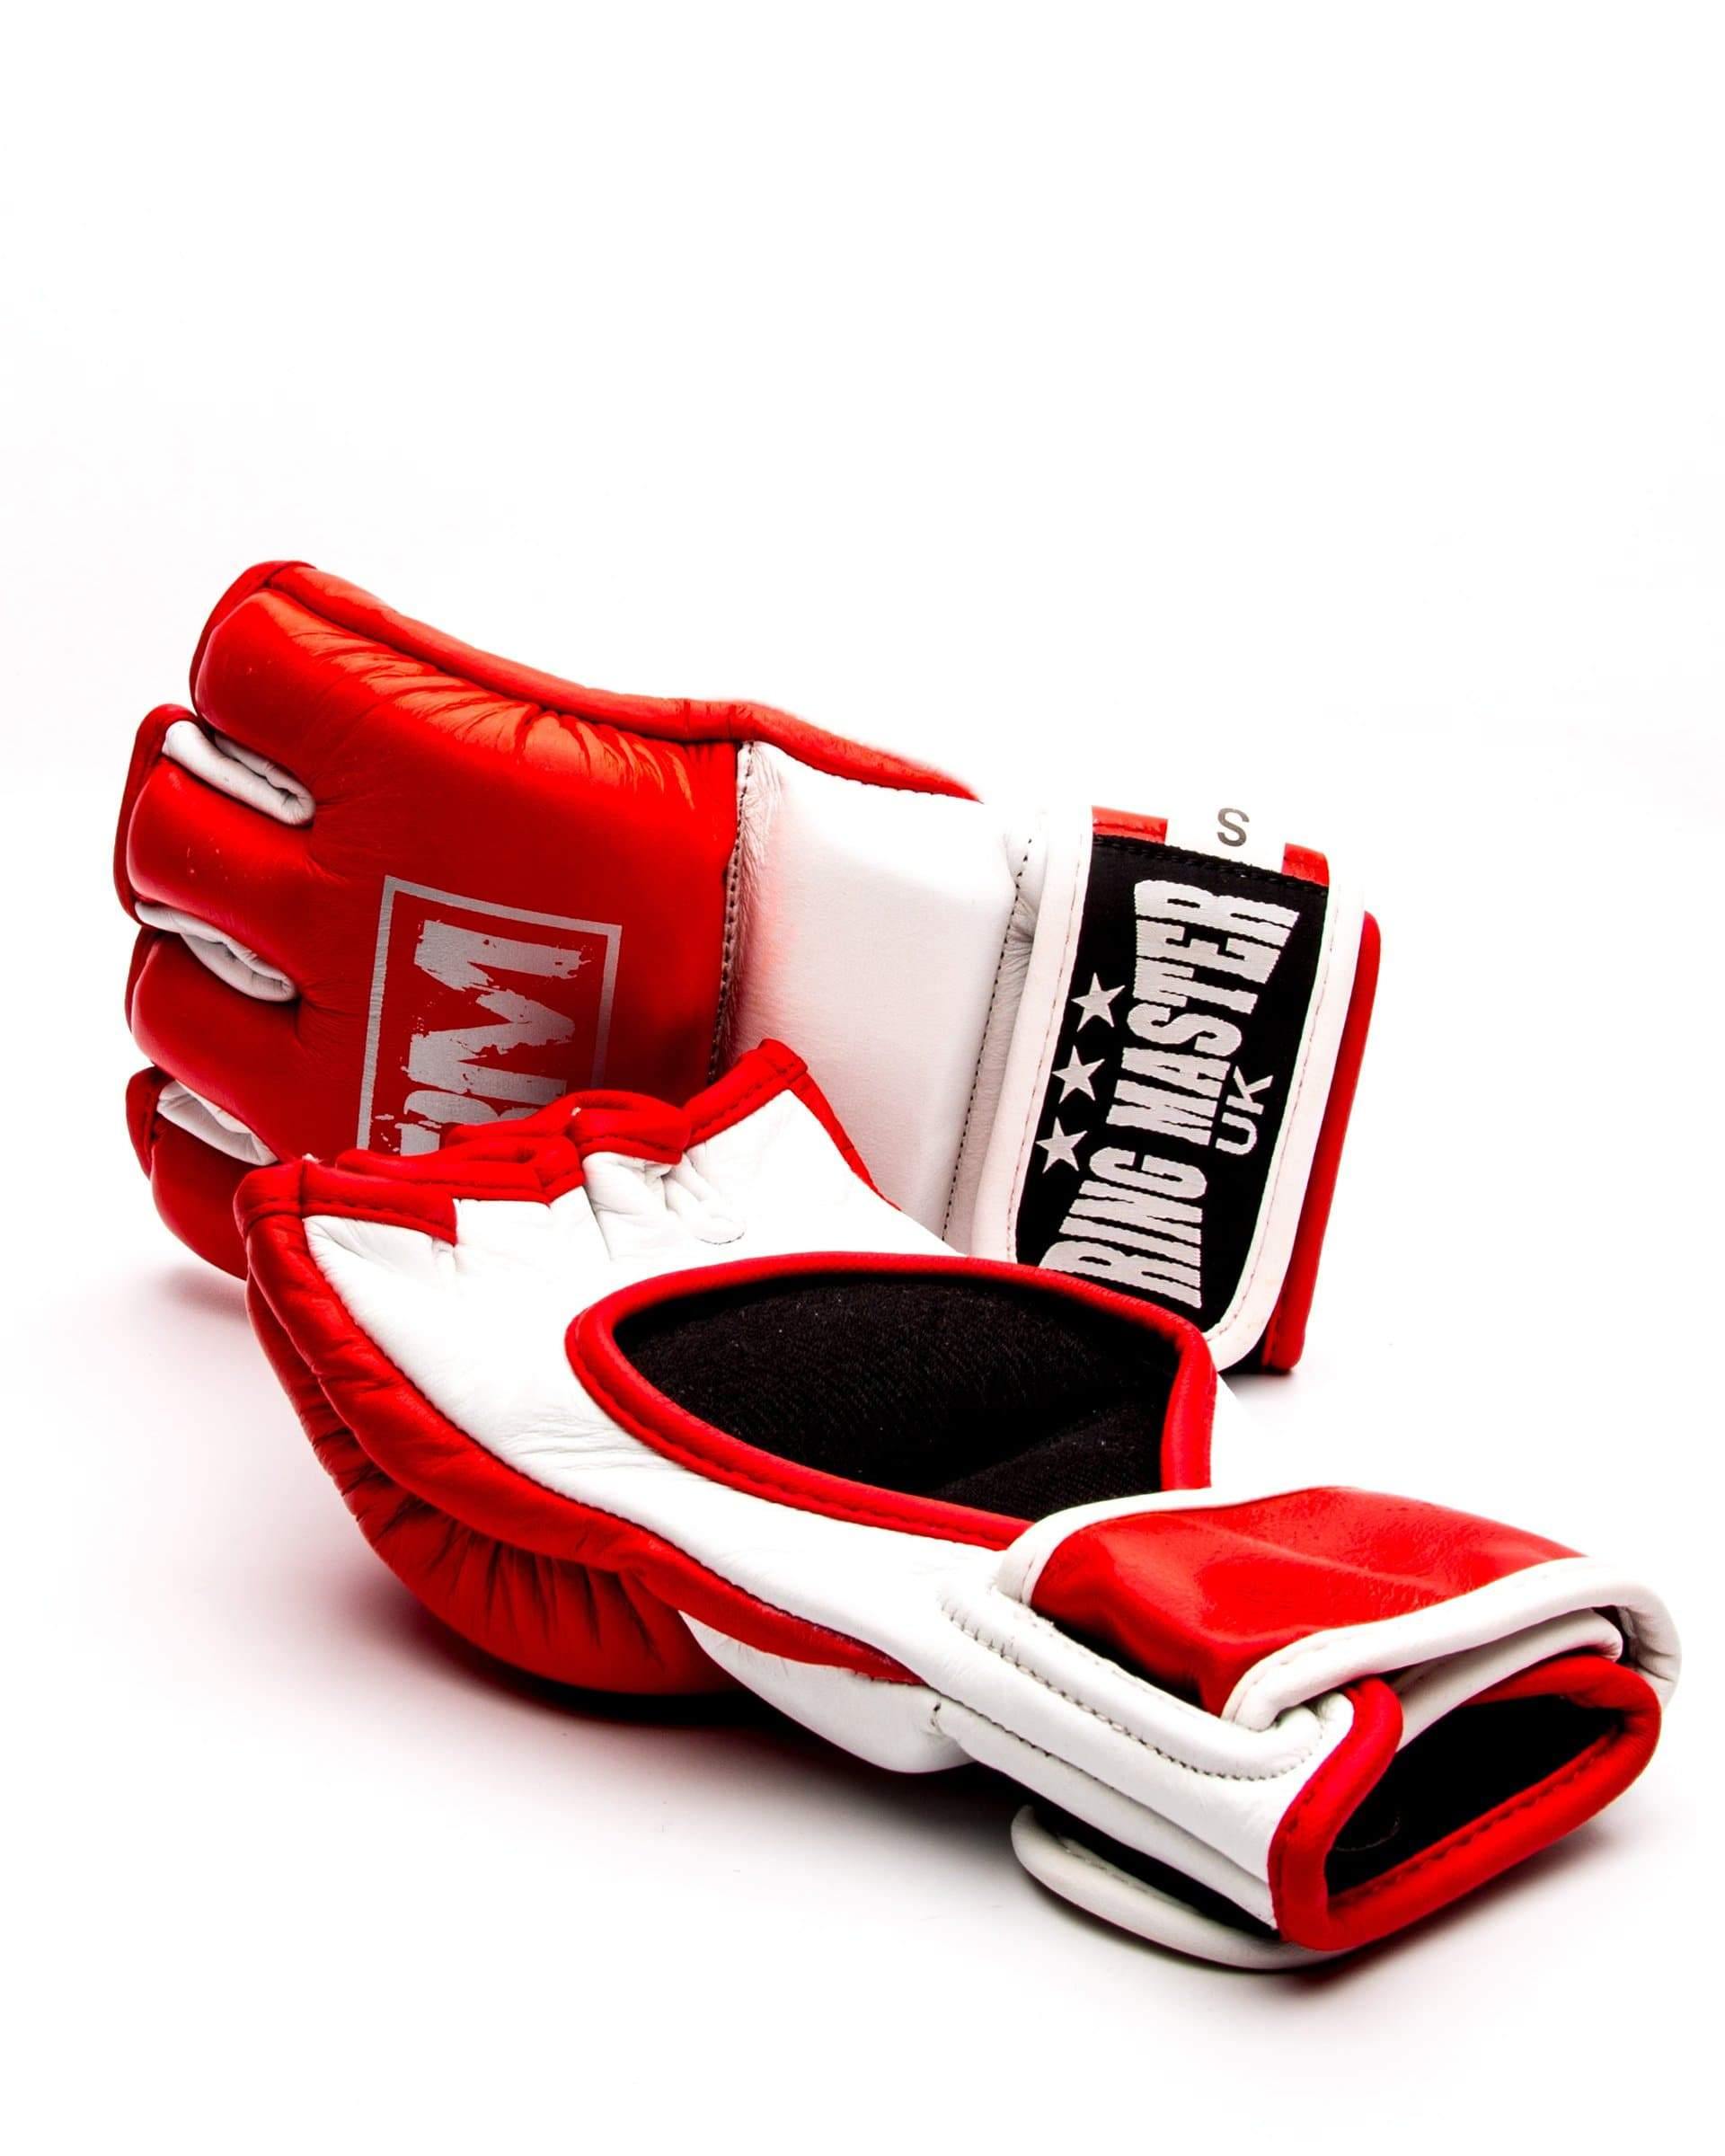 RingMaster Sports MMA Gloves Genuine Leather Red and White Image 2